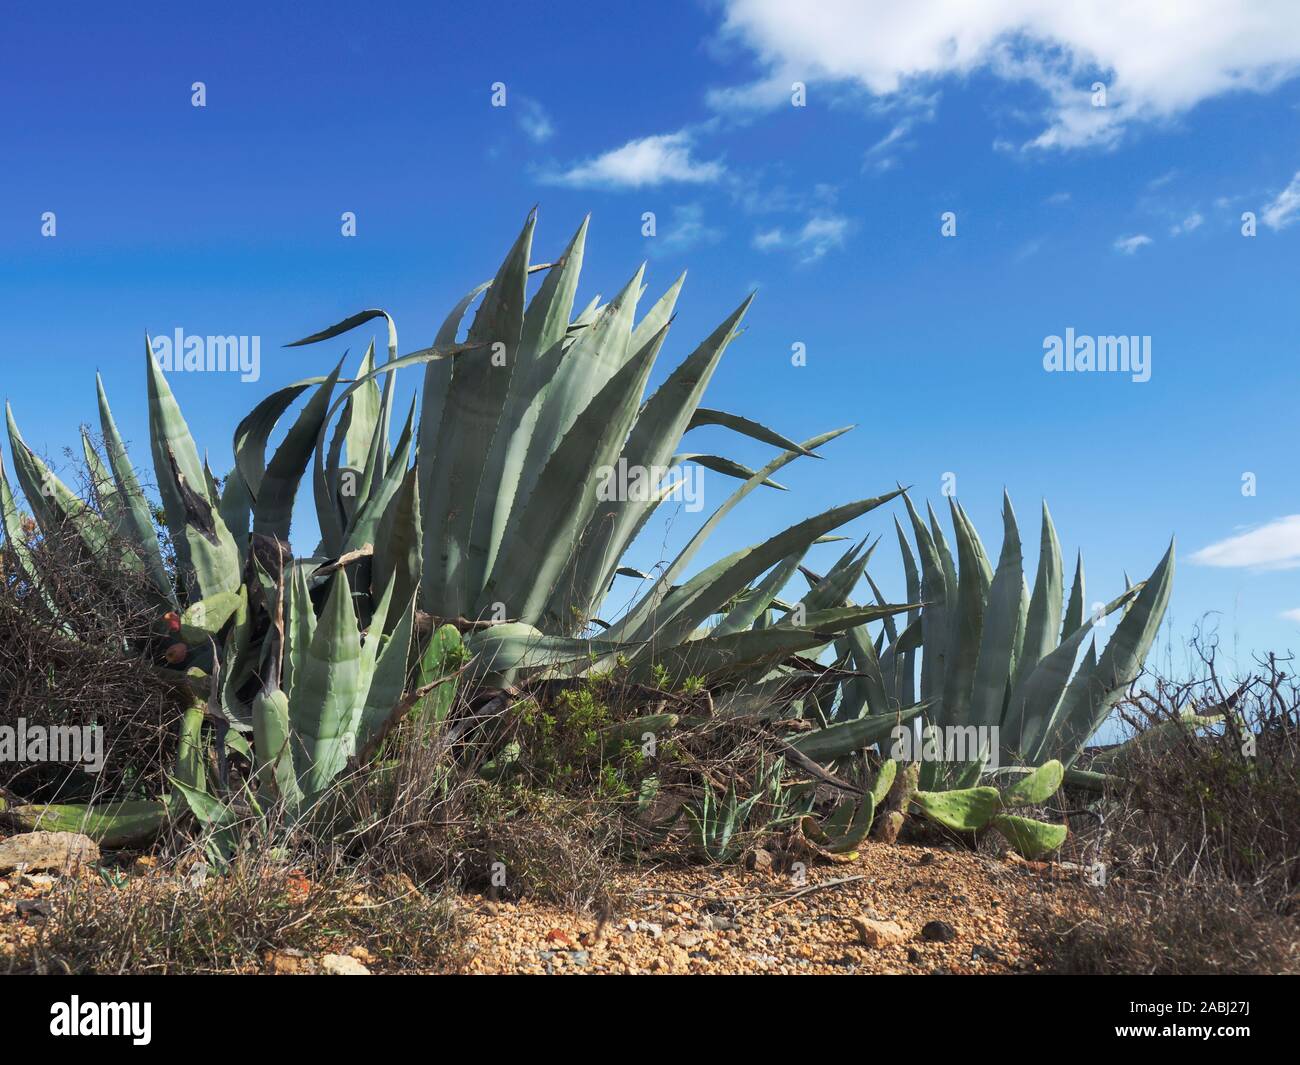 Large agaves (Agavoideae) without inflorescence photographed close together in the lush green against the blue sky of Tenerife. Close-up close to the Stock Photo